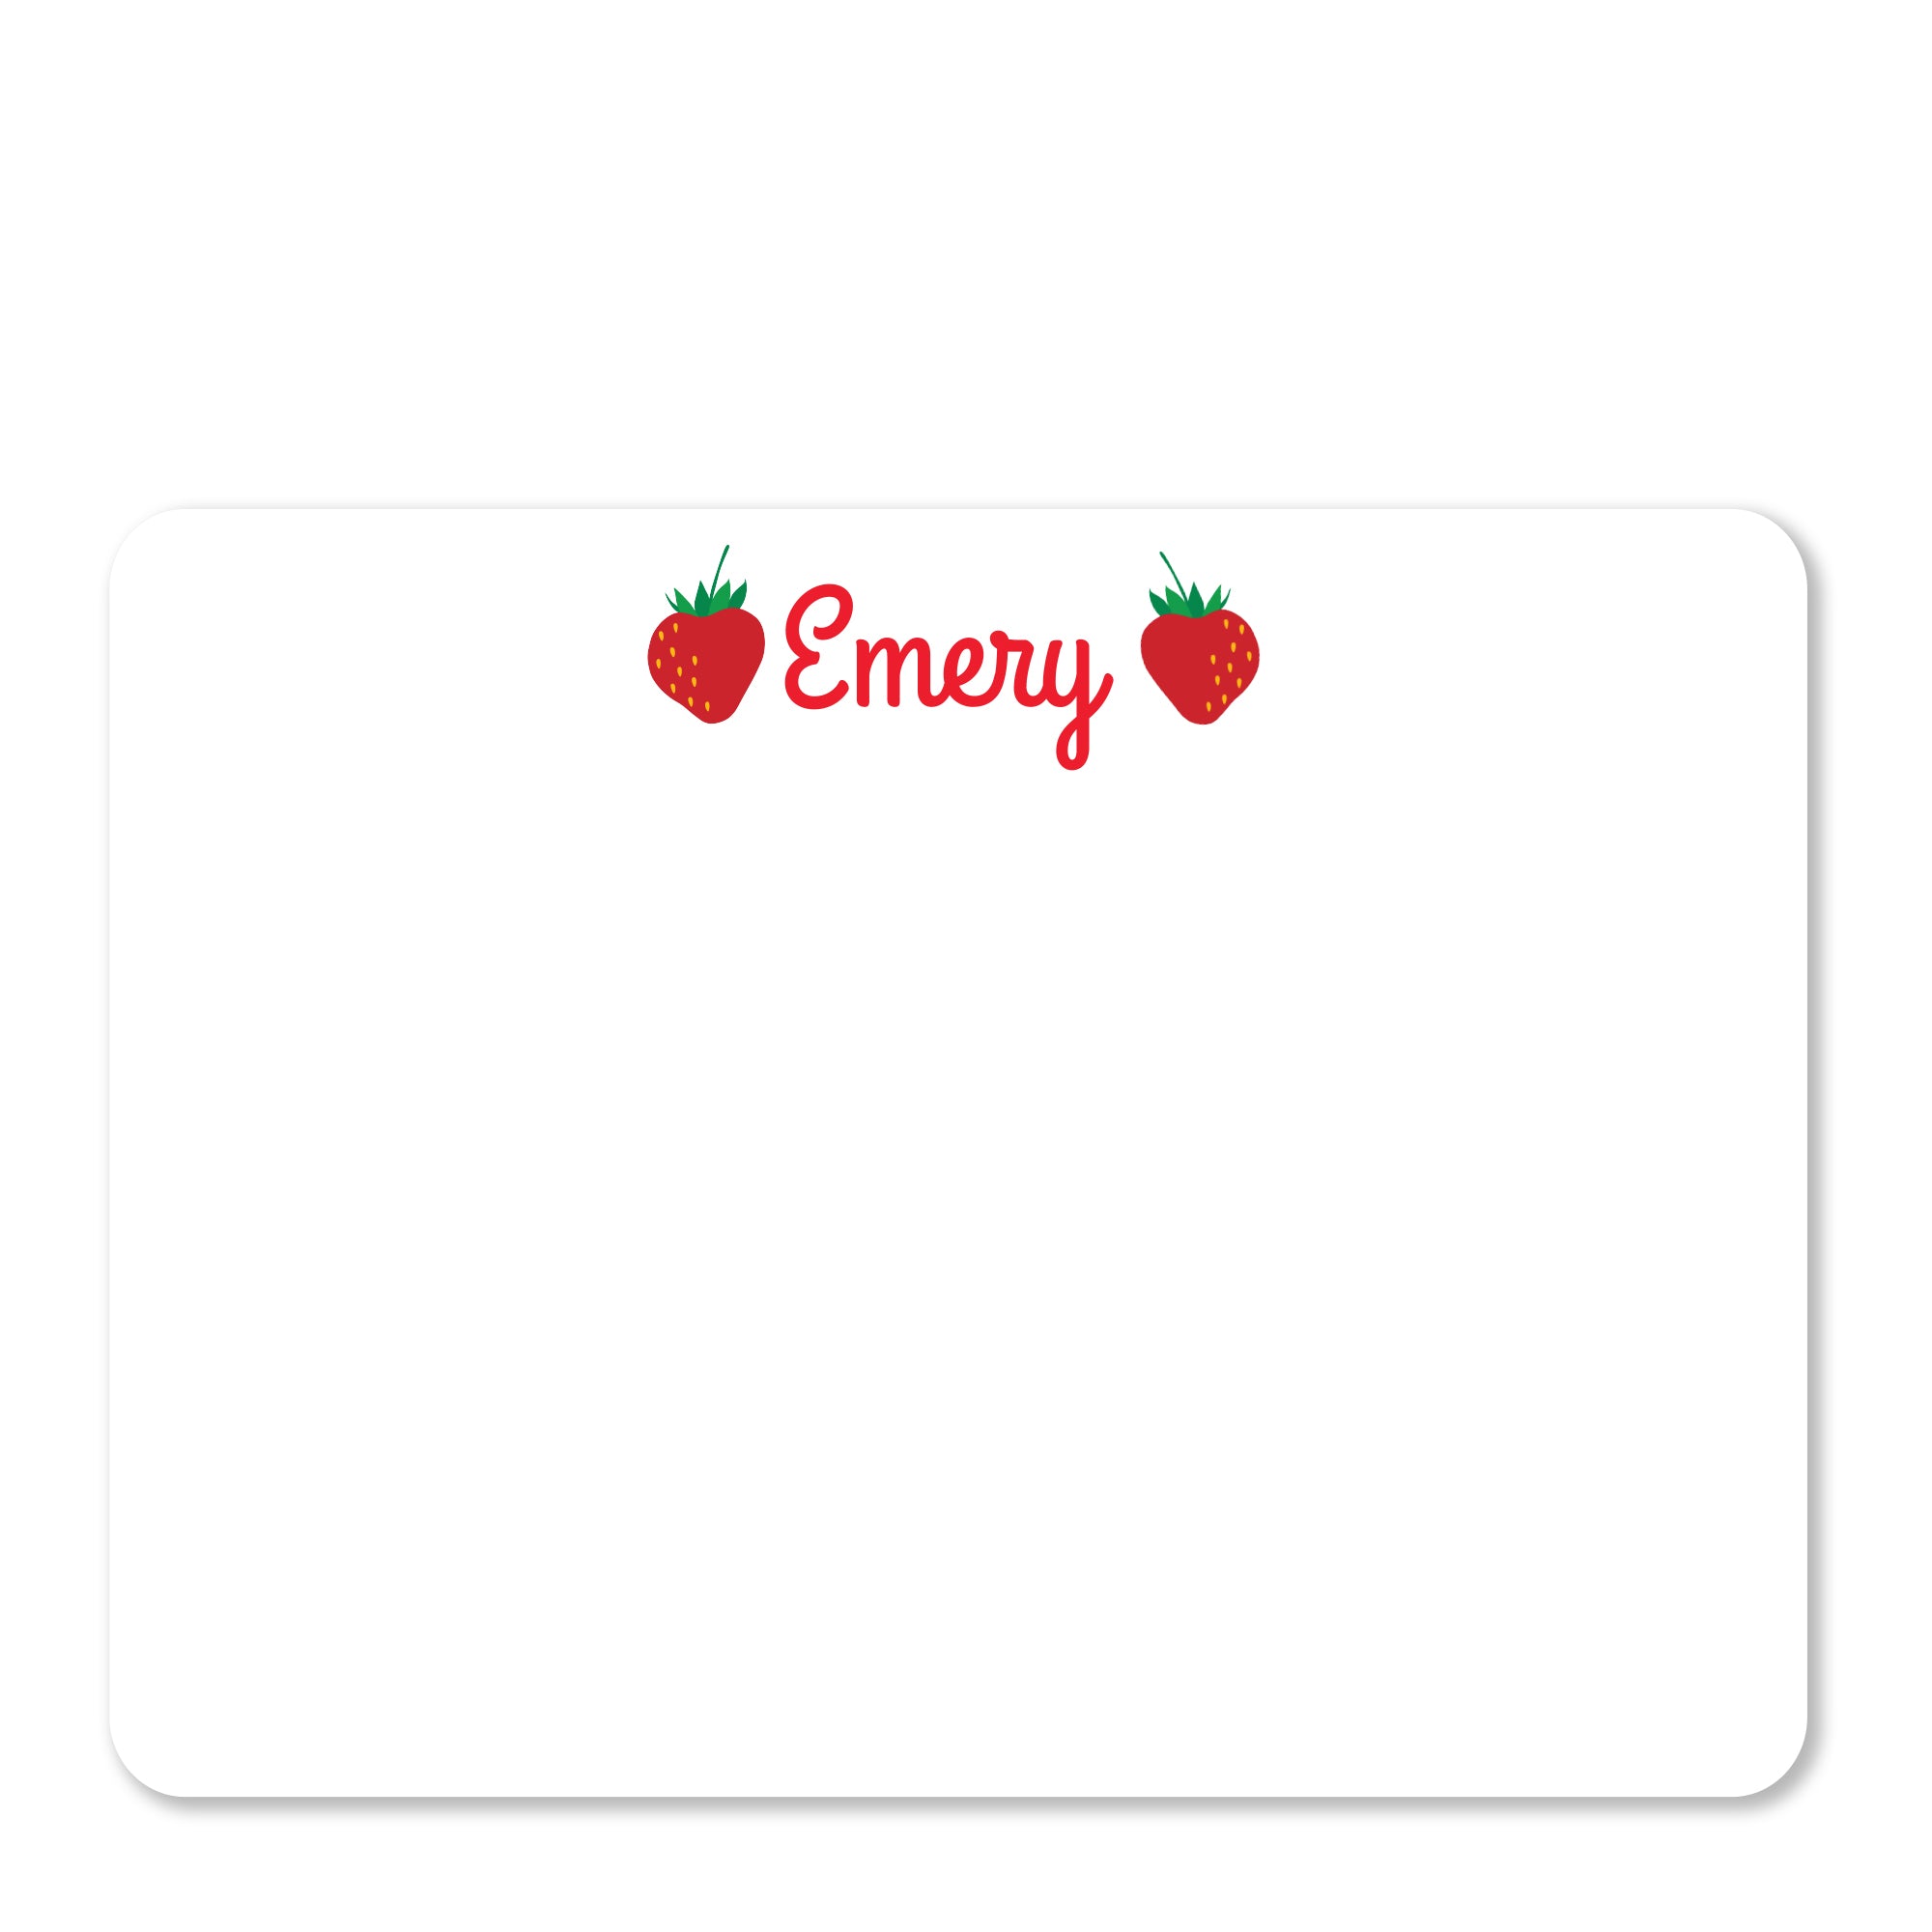 Strawberry stationery - thank you note cards to match a strawberry party theme, ultra heavy cardstock with 2 sided printing, comes with white envelopes, front view